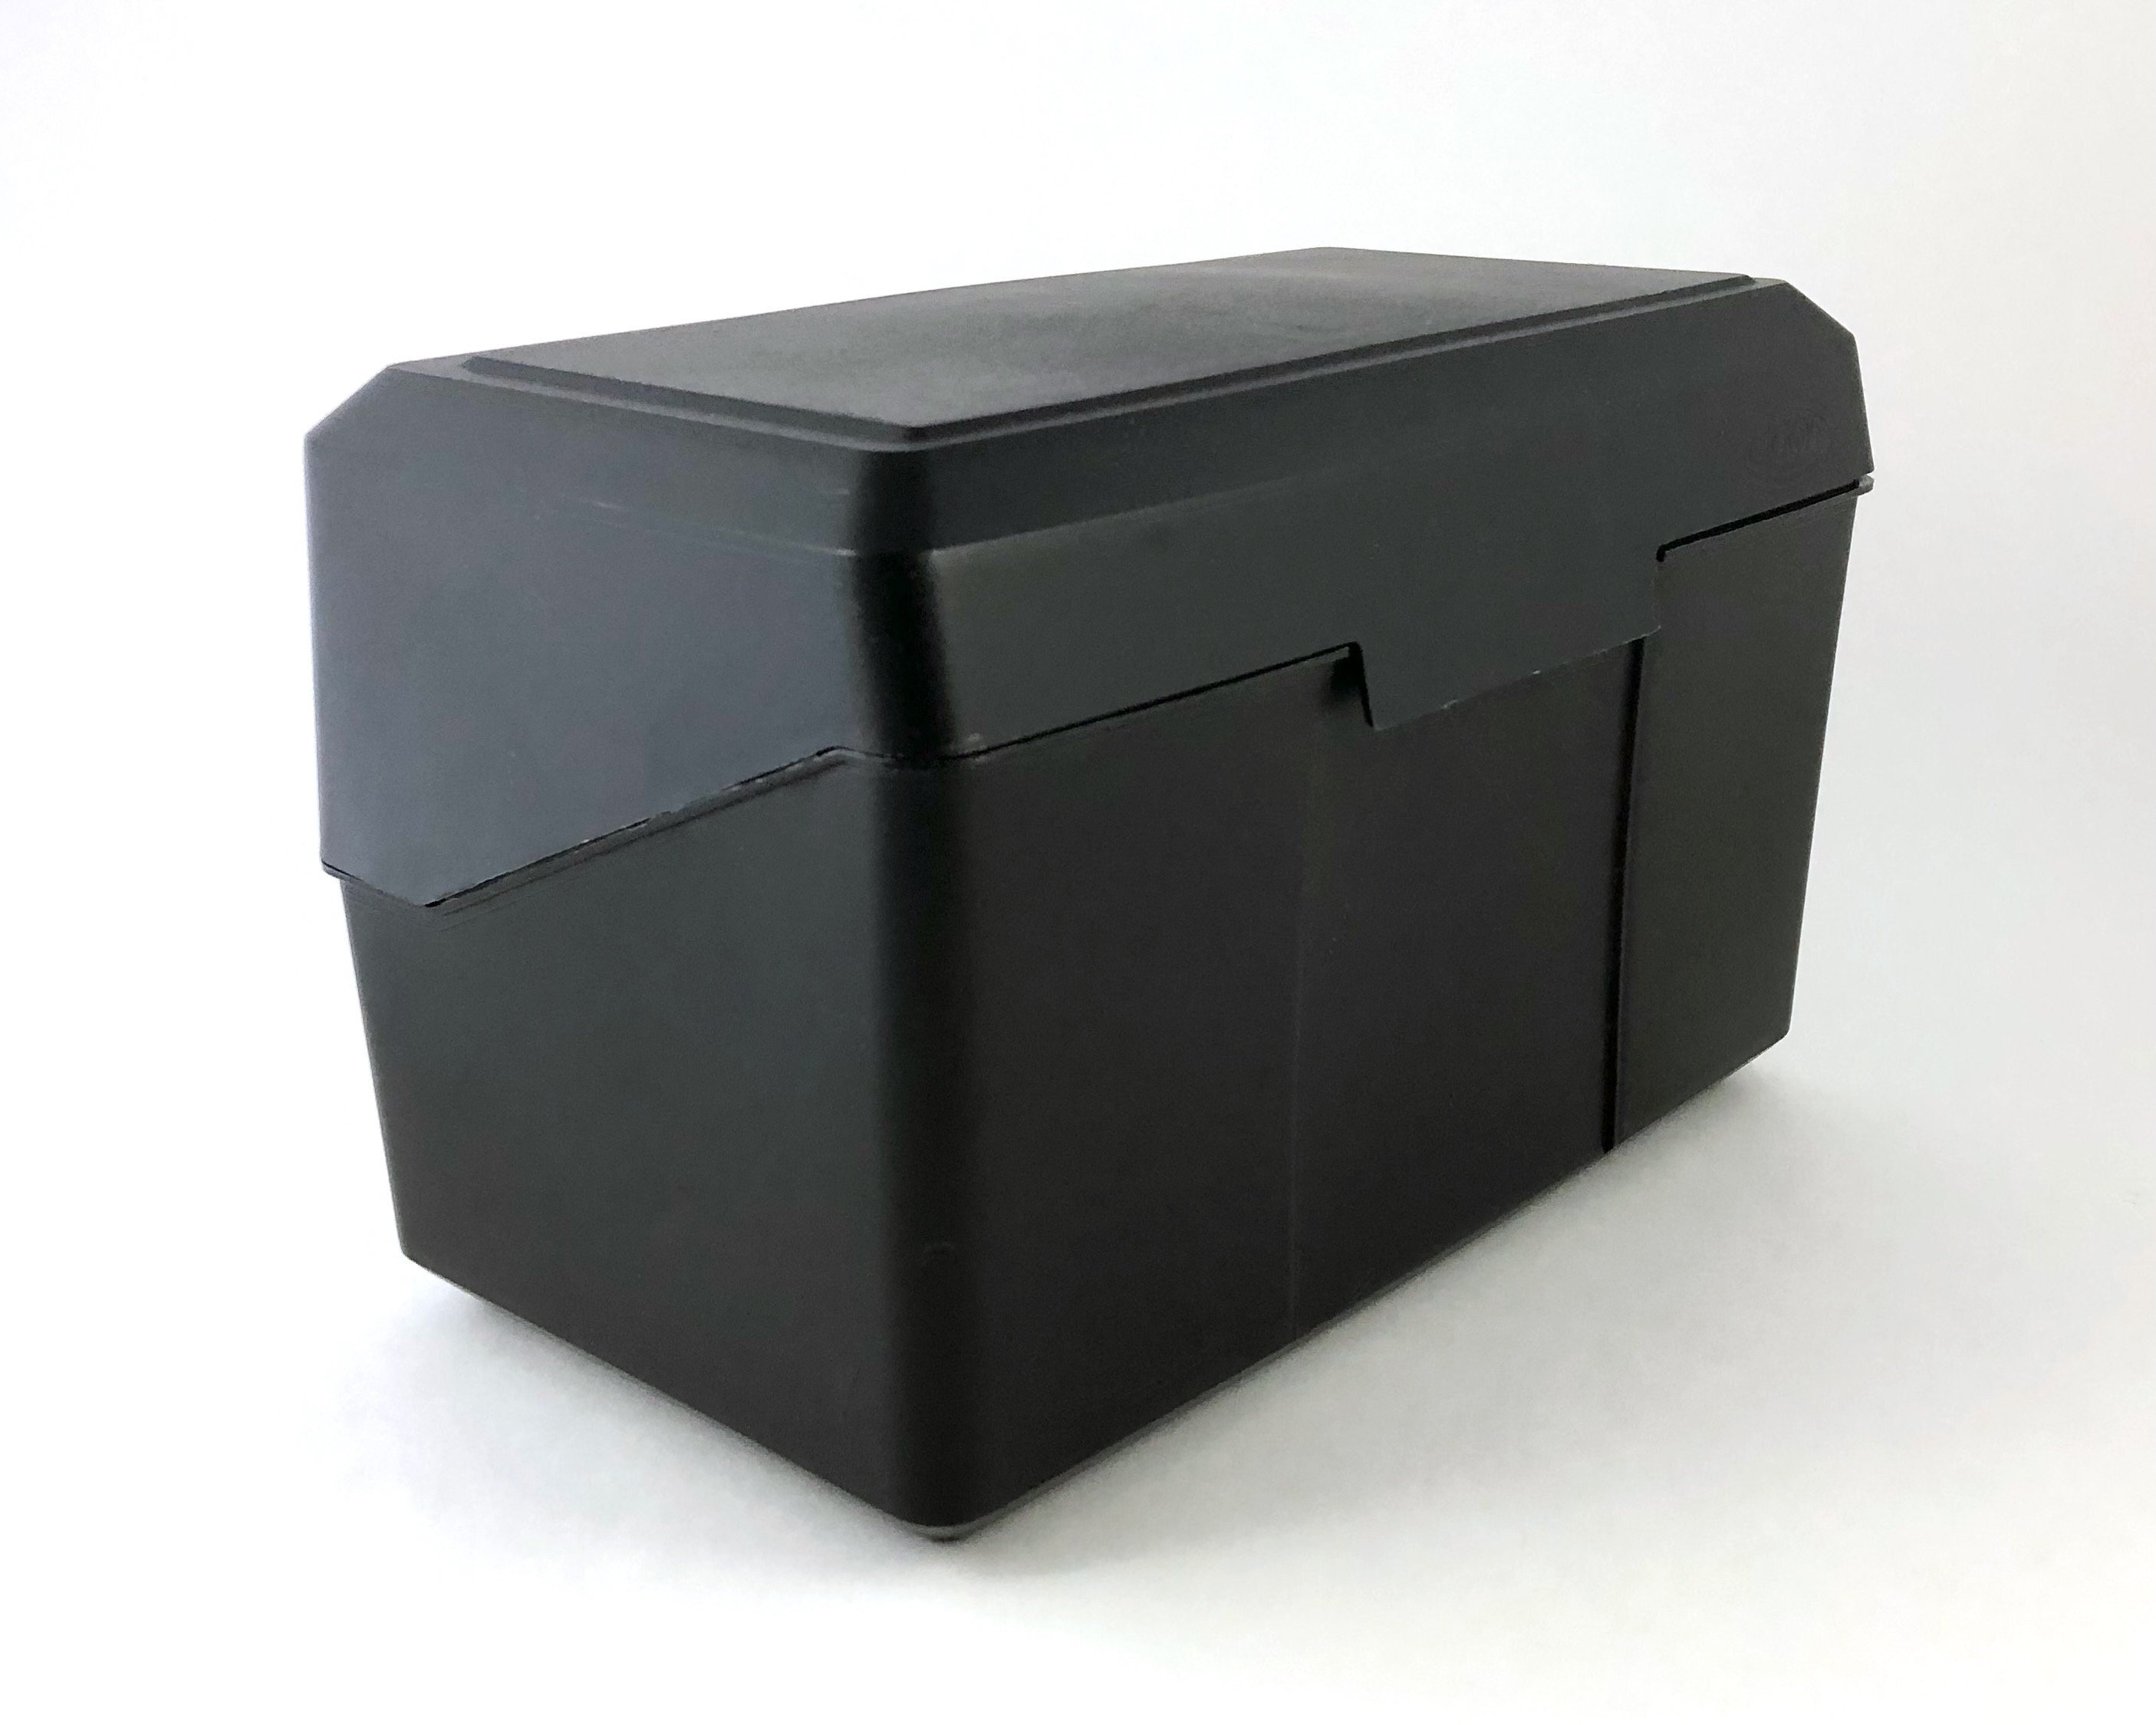 Sold as 2 Each Holds 1,100 5 x 8 Cards Collapsible Index Card File Box Black 